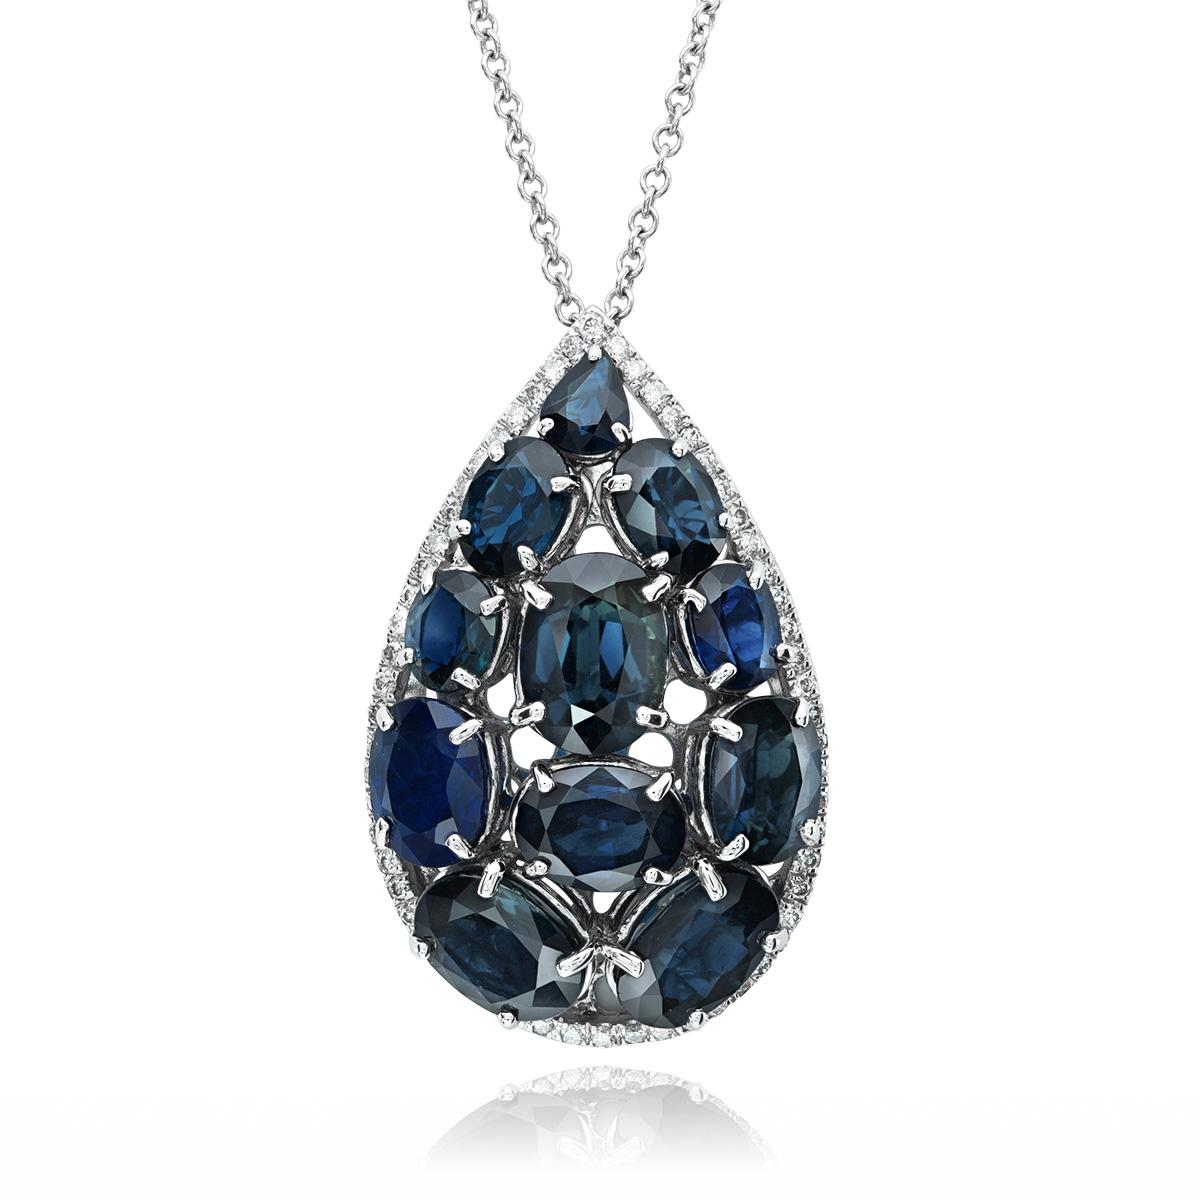 Brilliant Cut 16.50Ct Natural Blue Sapphires Diamond 18K White Gold Necklace, Jewelry Sapphire For Sale